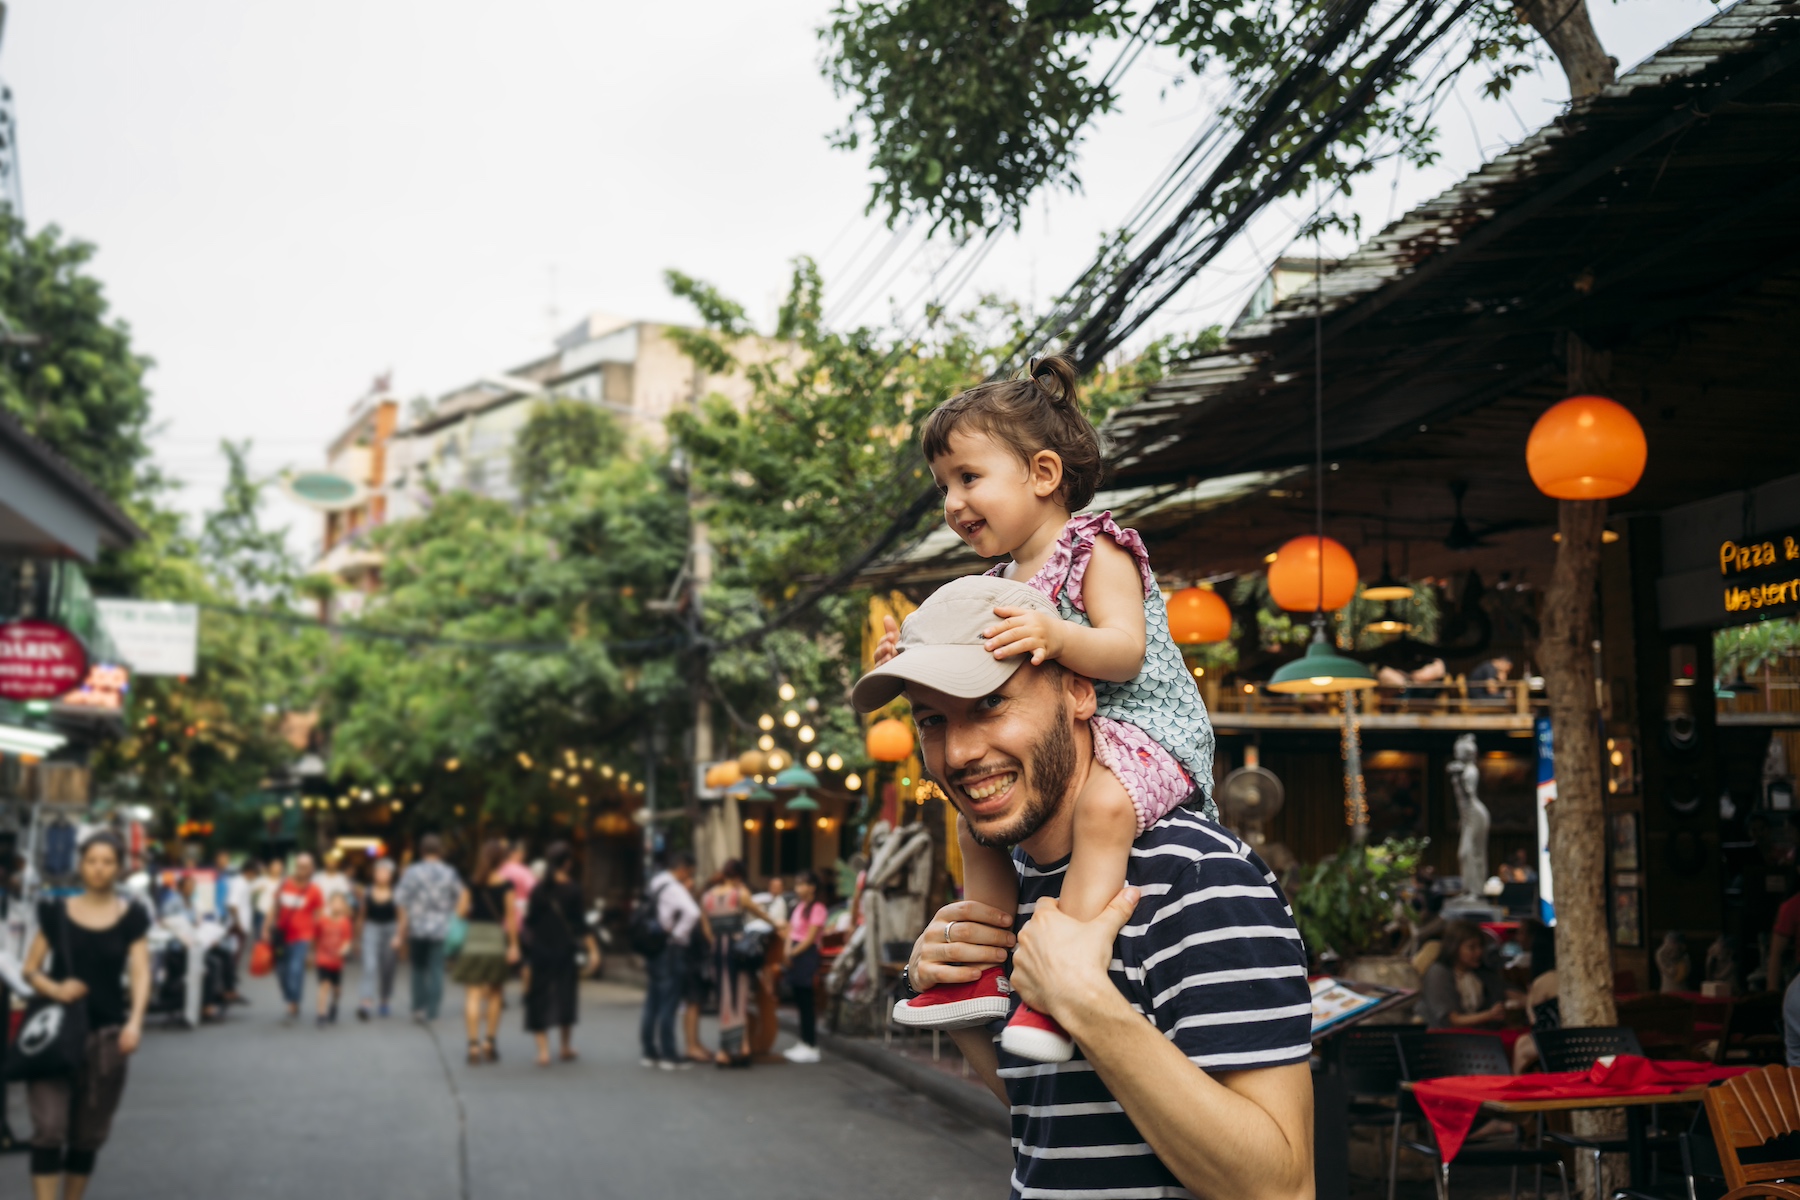 A father smiles holding his young daughter on his shoulders in a crowded Bangkok street